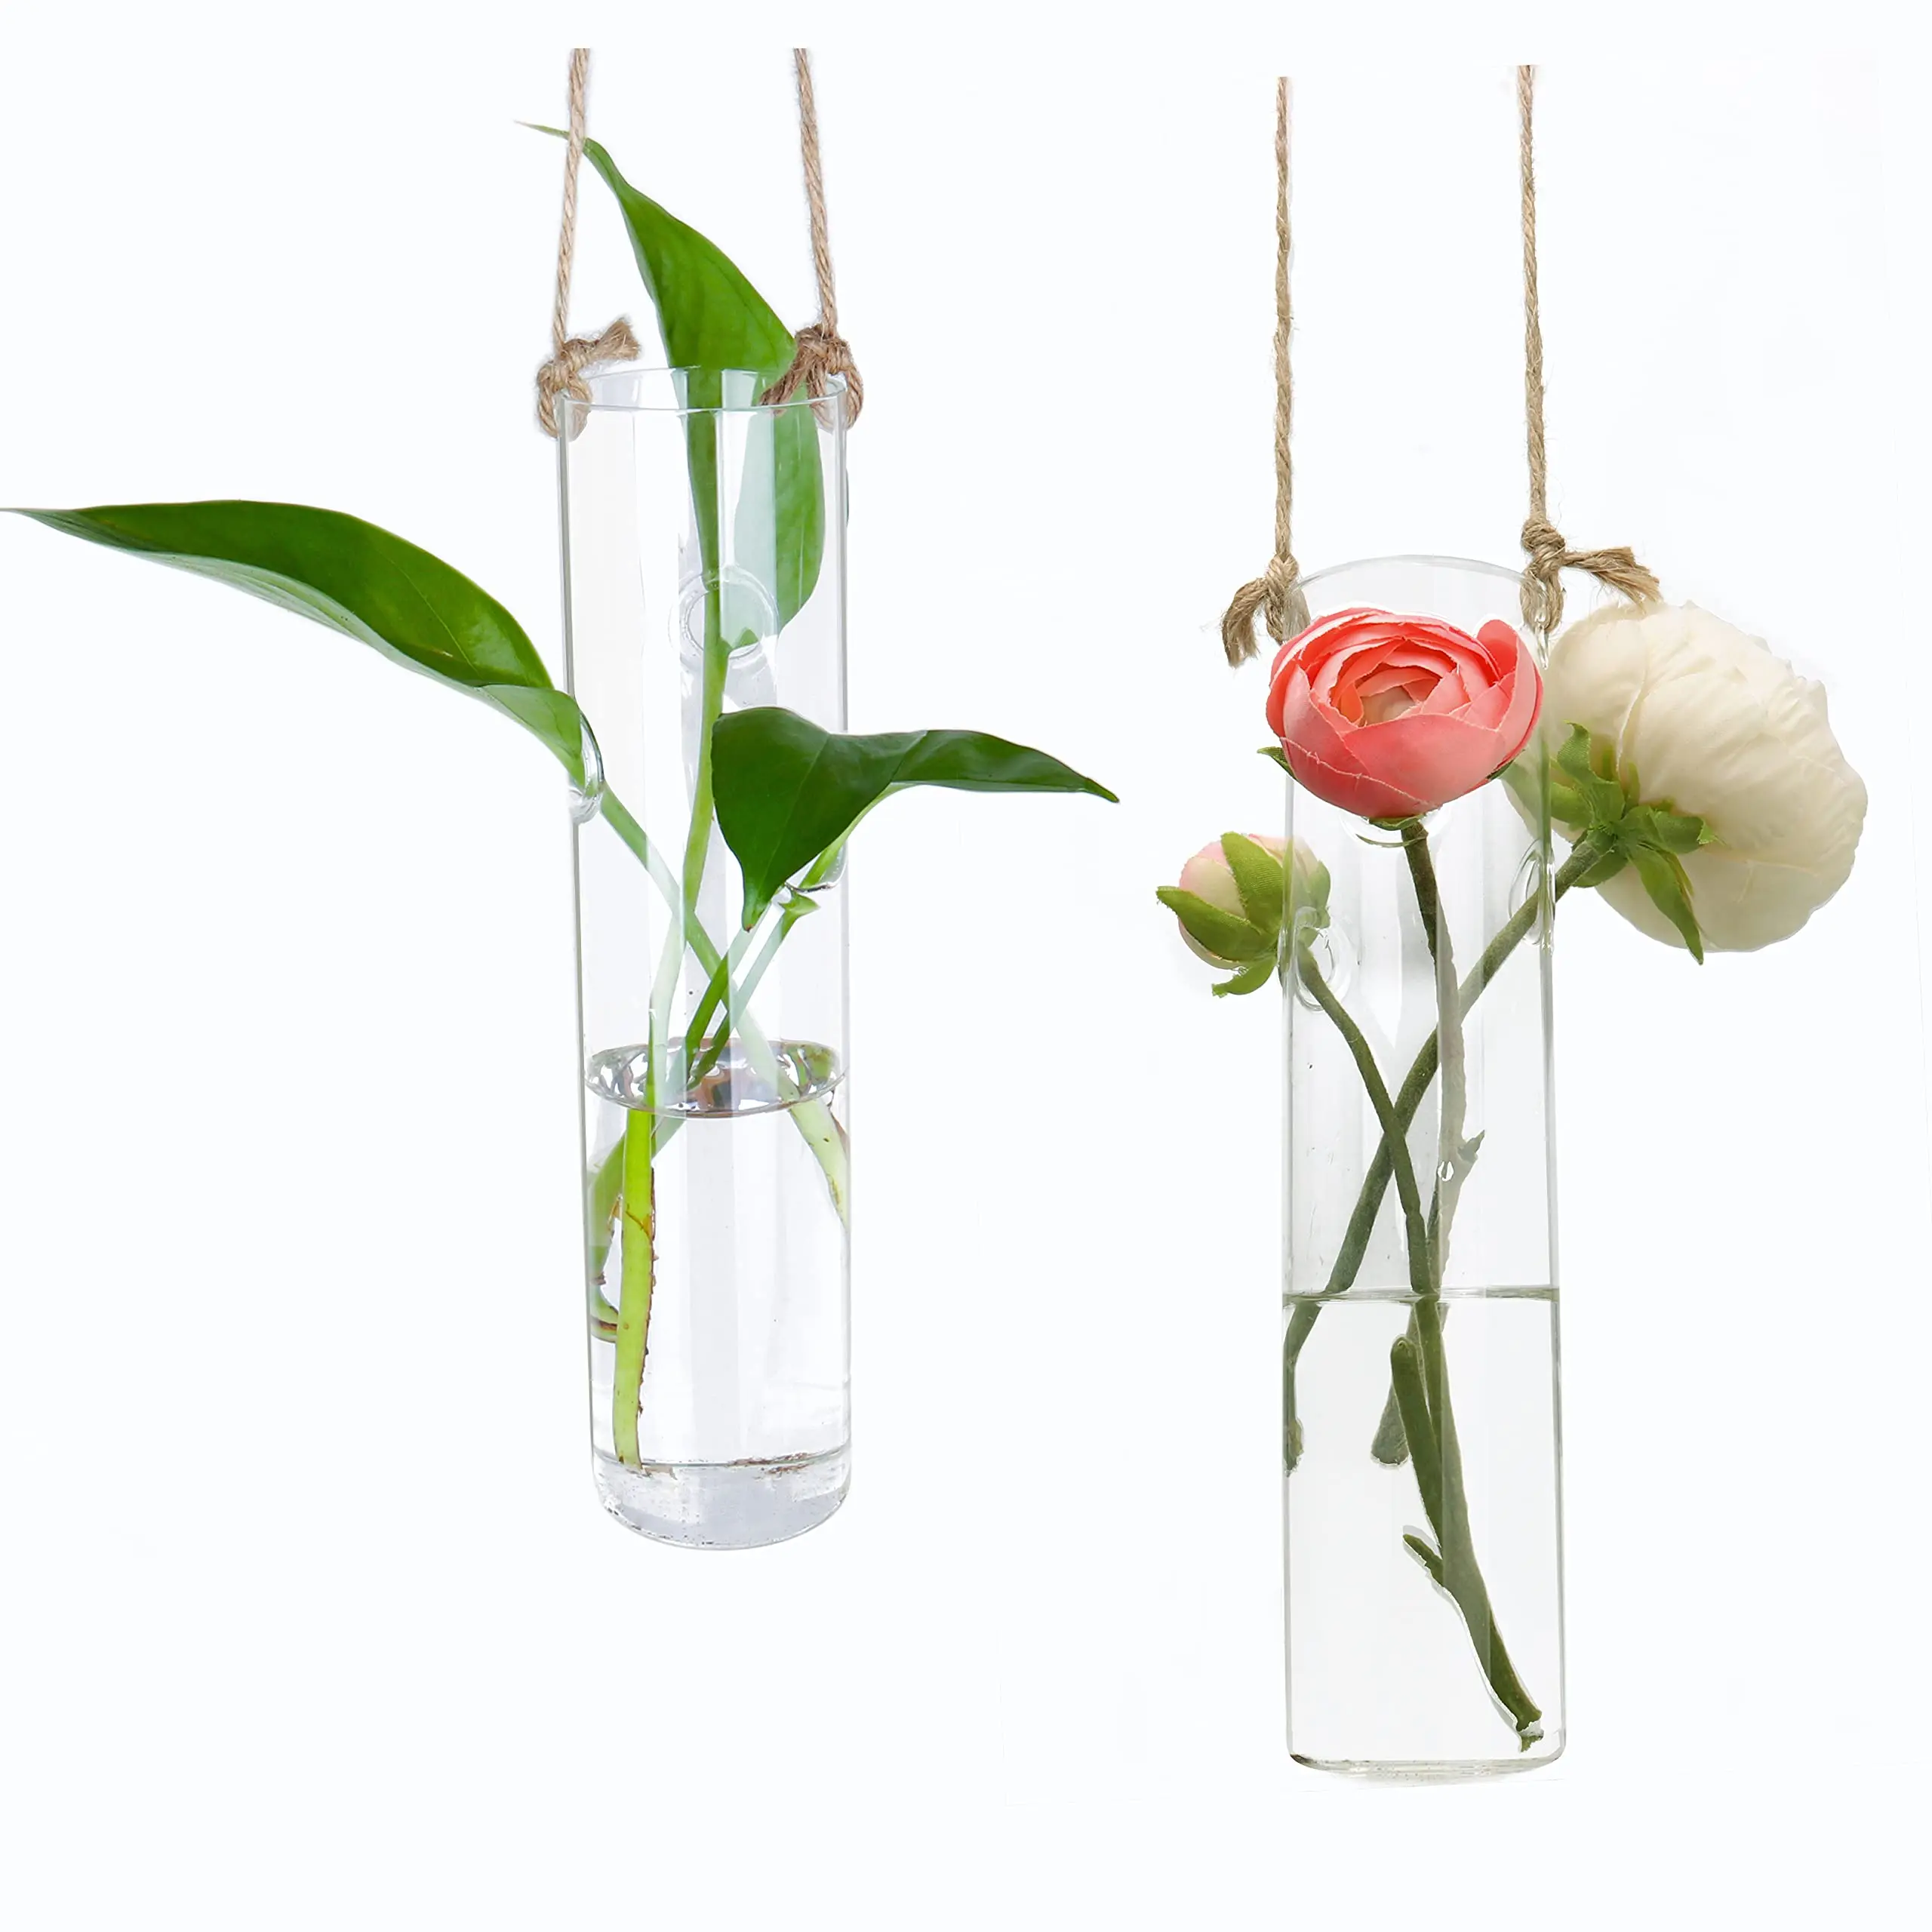 

Clear Cylinder Hanging Glass Tube Flower Planter Vase Terrarium Container for Hydroponic Plants Home Garden Decor